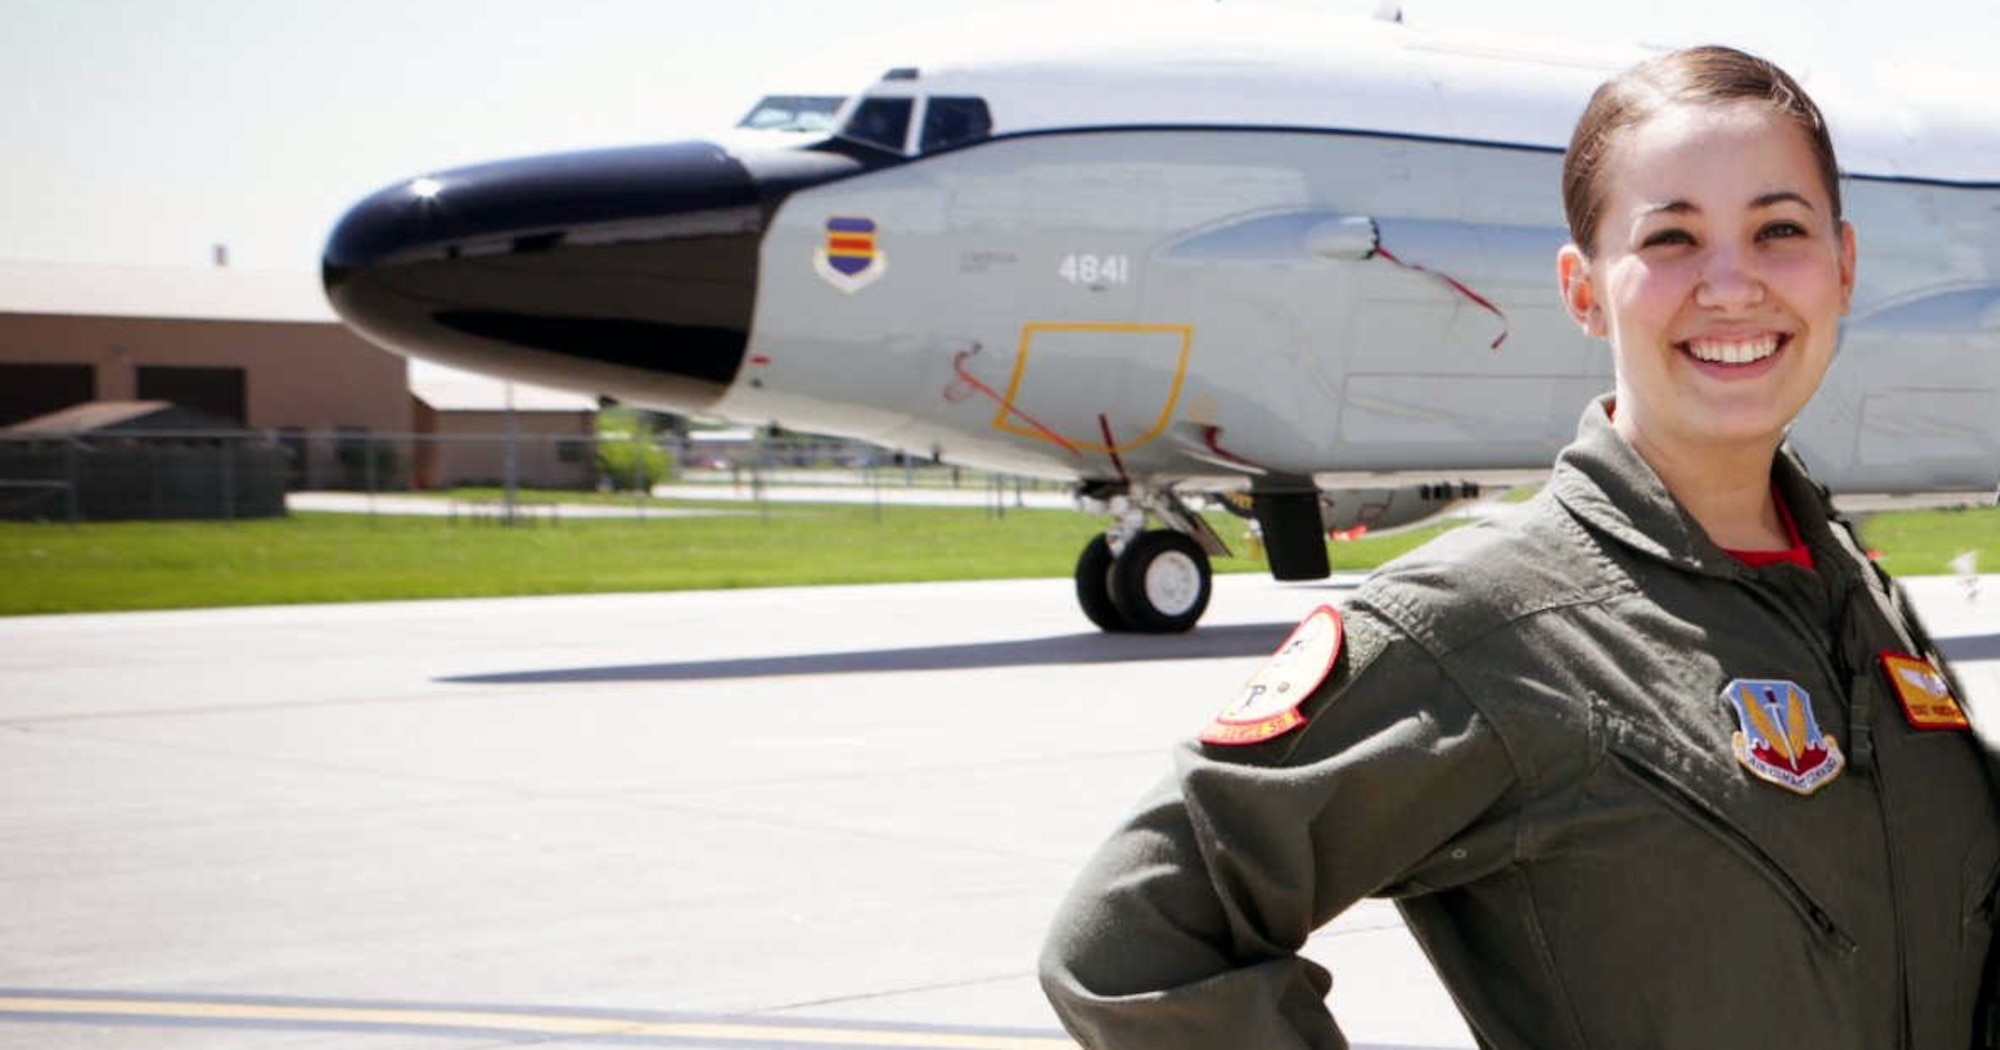 Image of Airman posing for a photo in front of a plane.